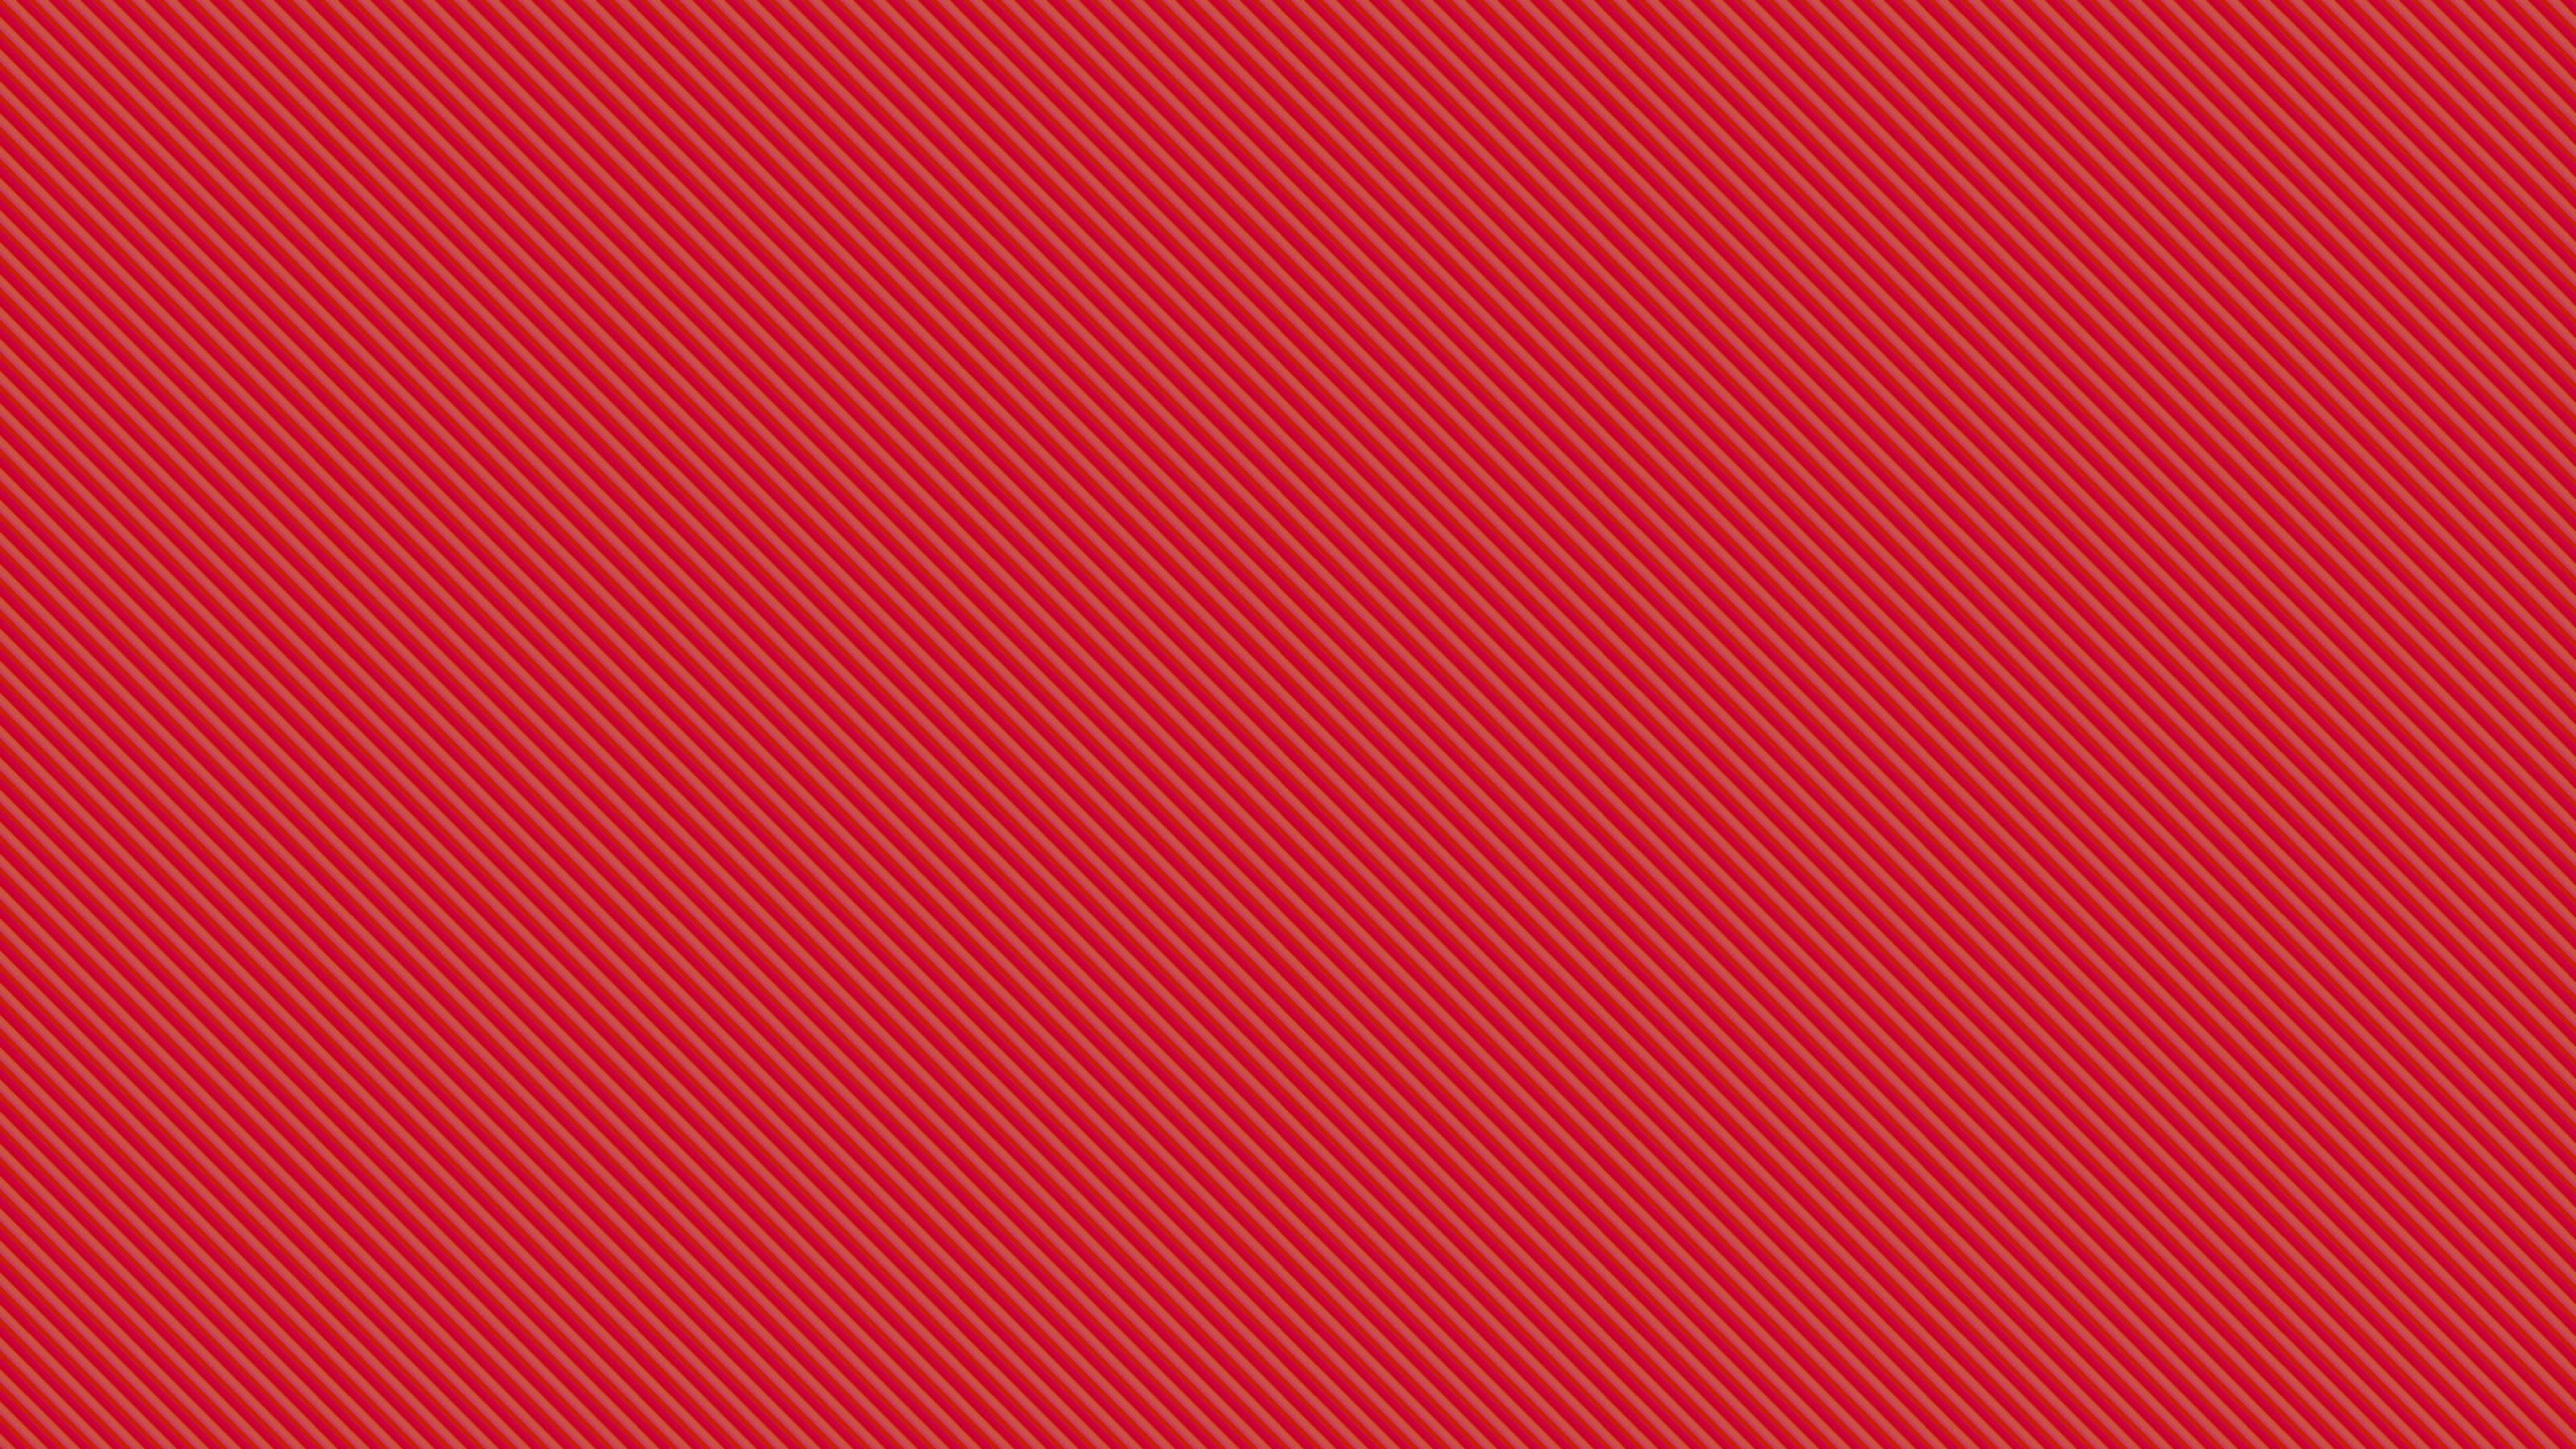 Red and White Striped Textile. Wallpaper in 3840x2160 Resolution